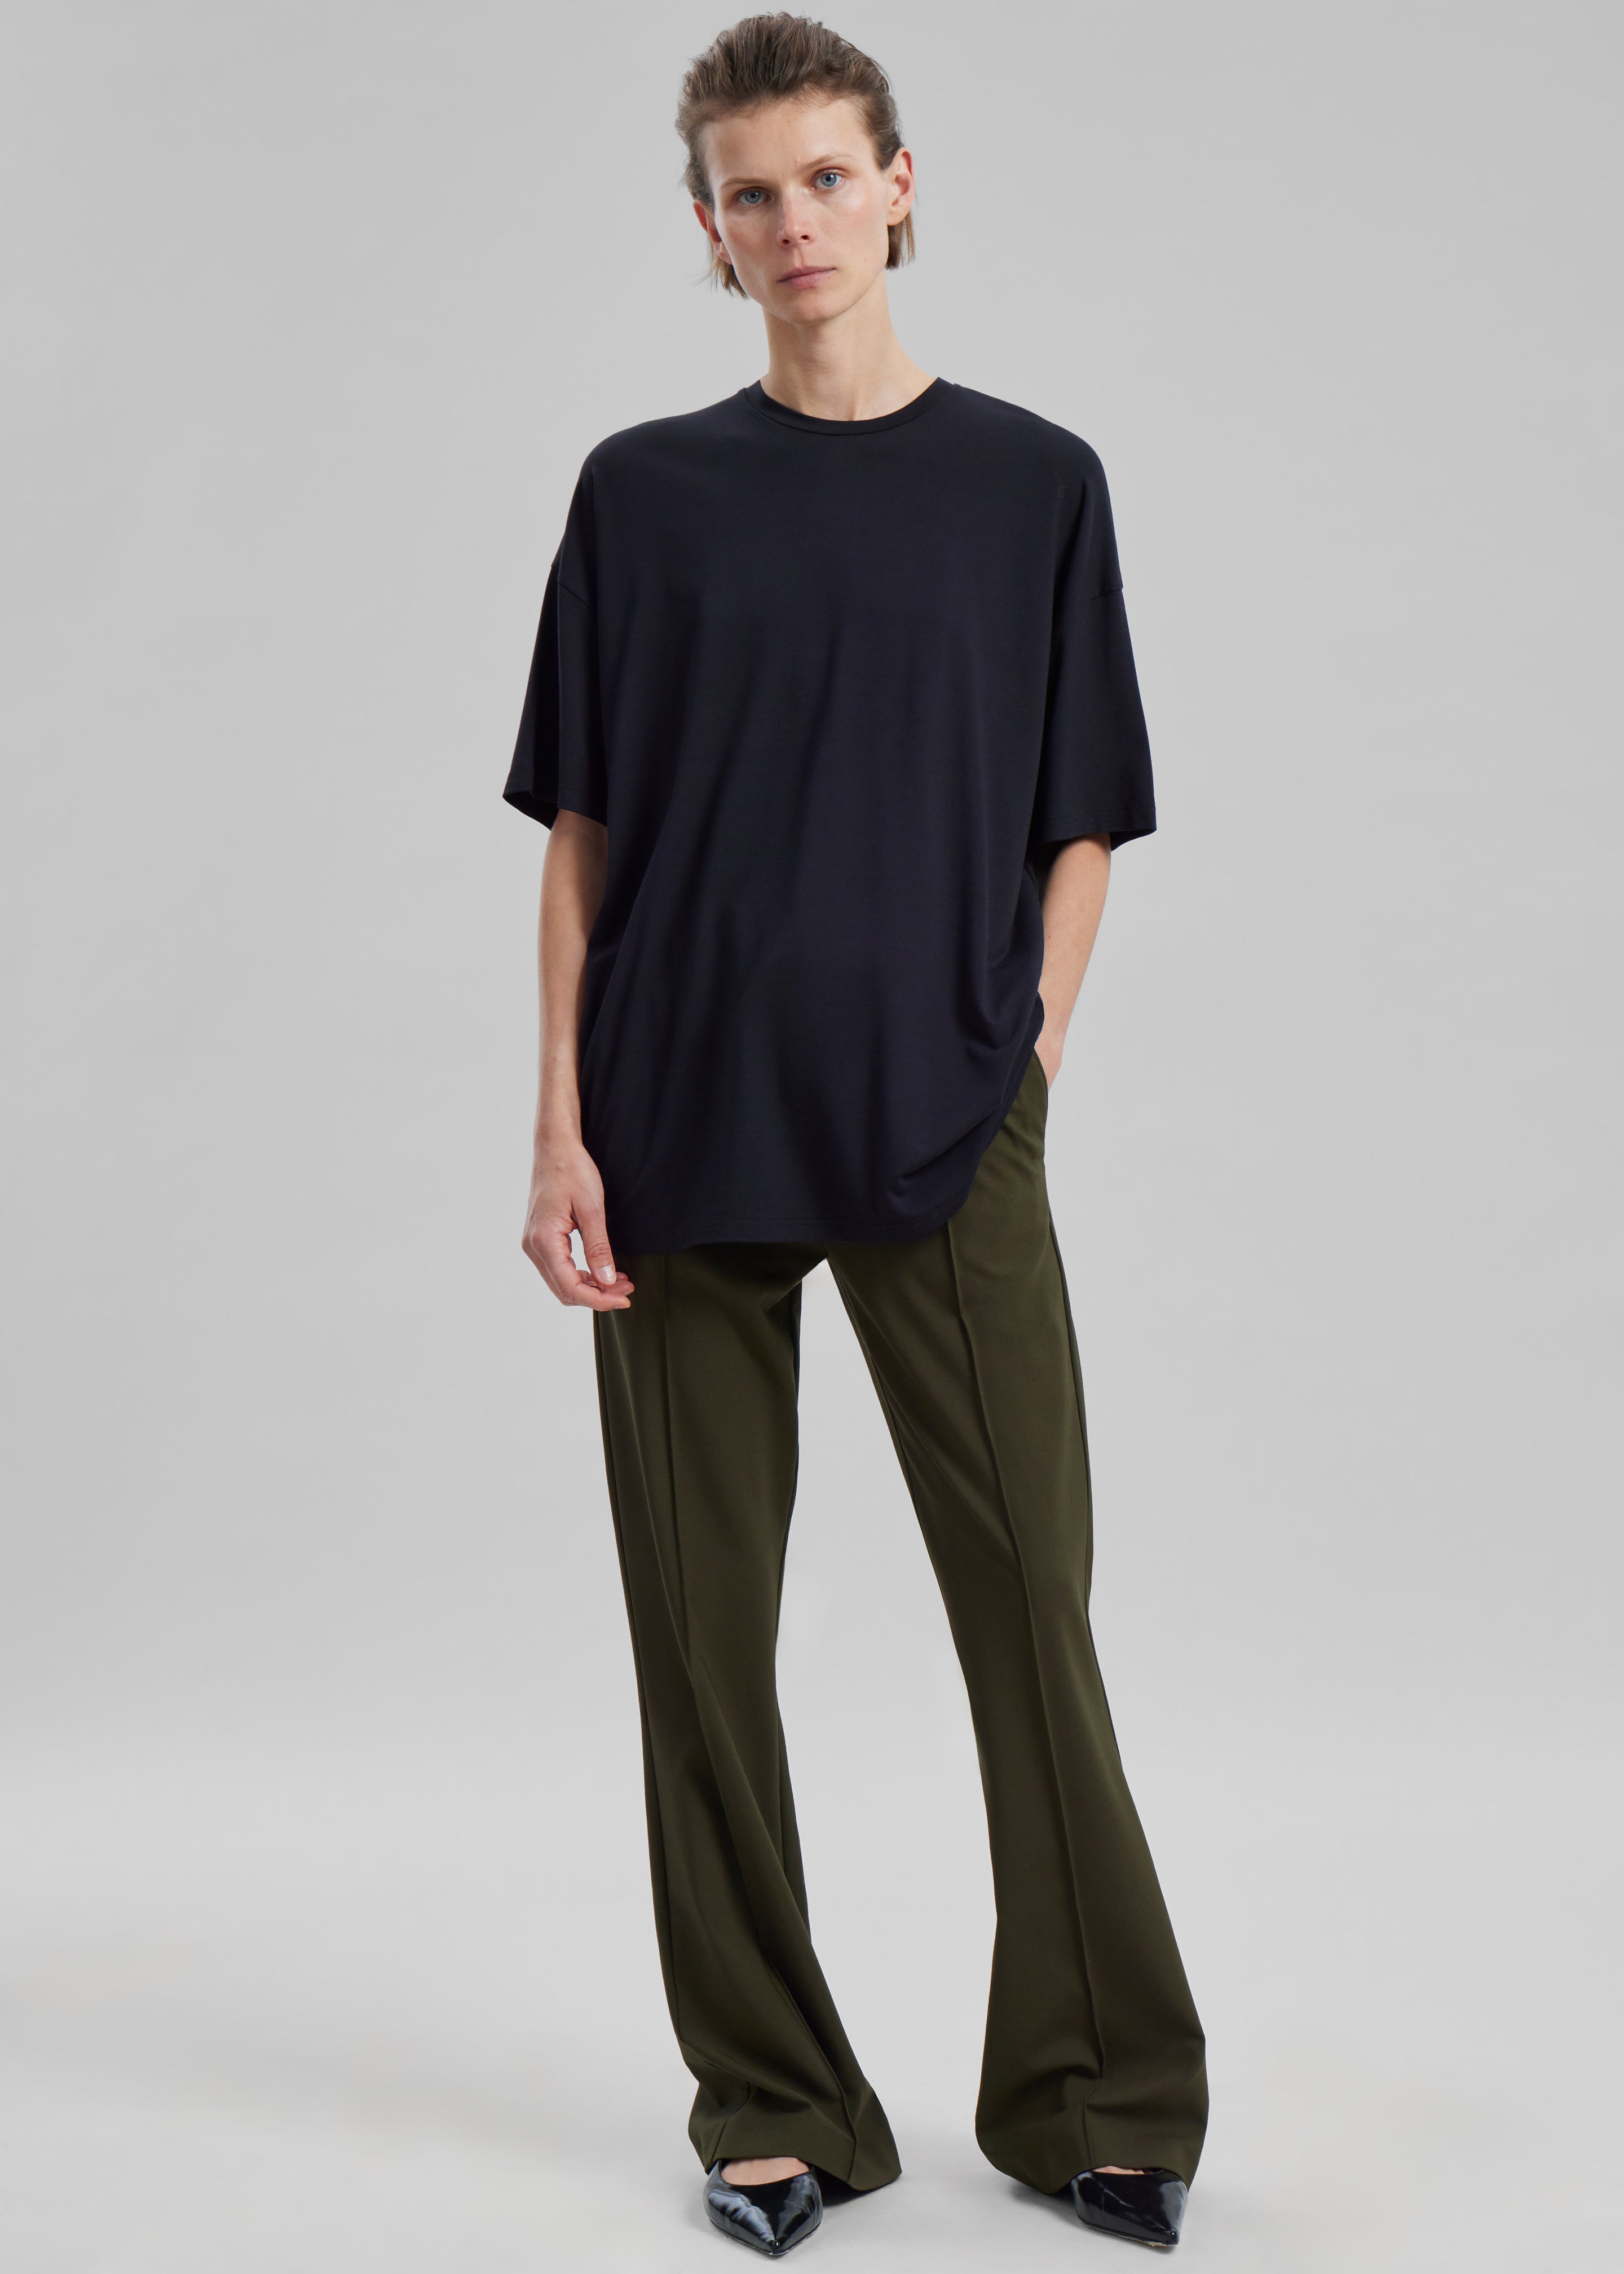 JW Anderson Drawstring Waist Tailored Trousers - Olive - 4